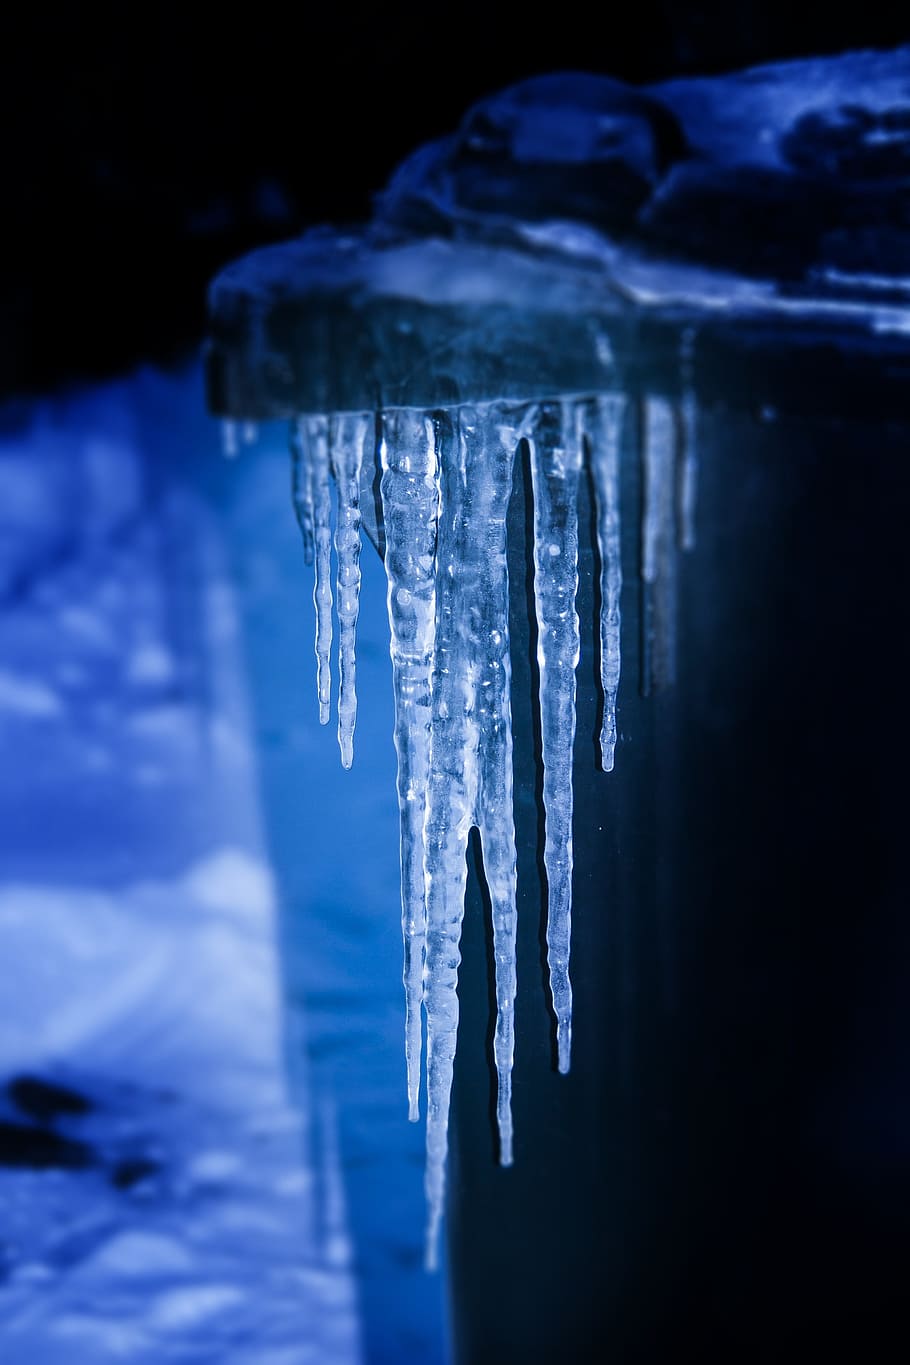 Ice, Frozen, Winter, Frosted, Wintry, frost, cold, icicle, icicles, crystal